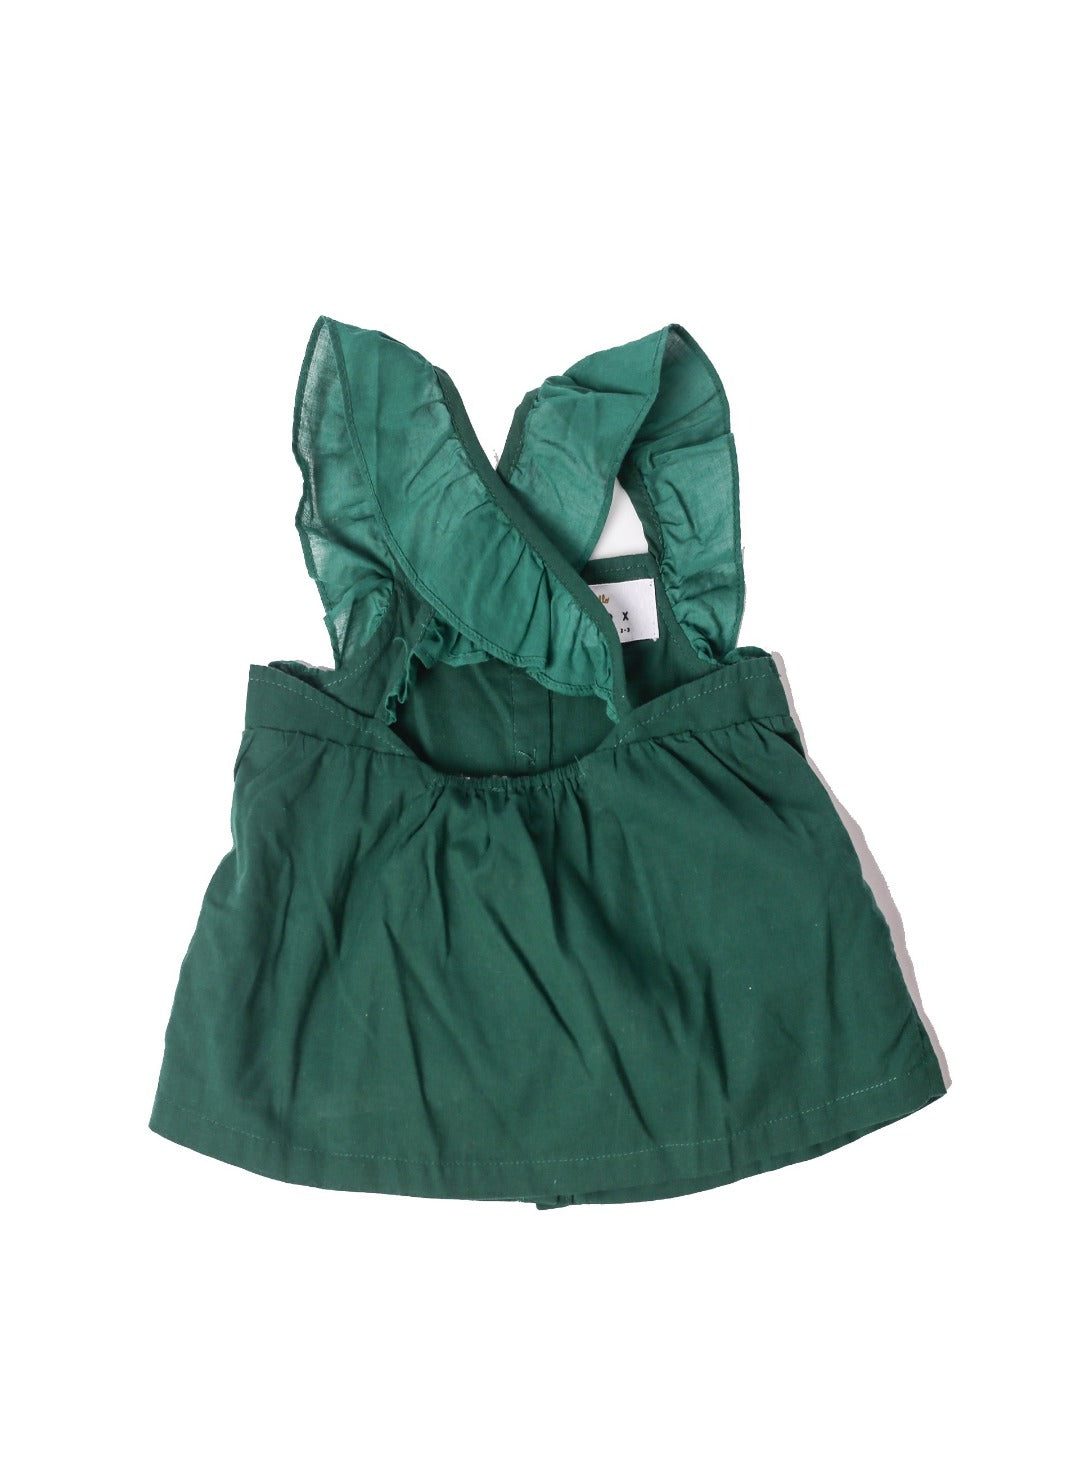 forest green sleeveless top with ruffles